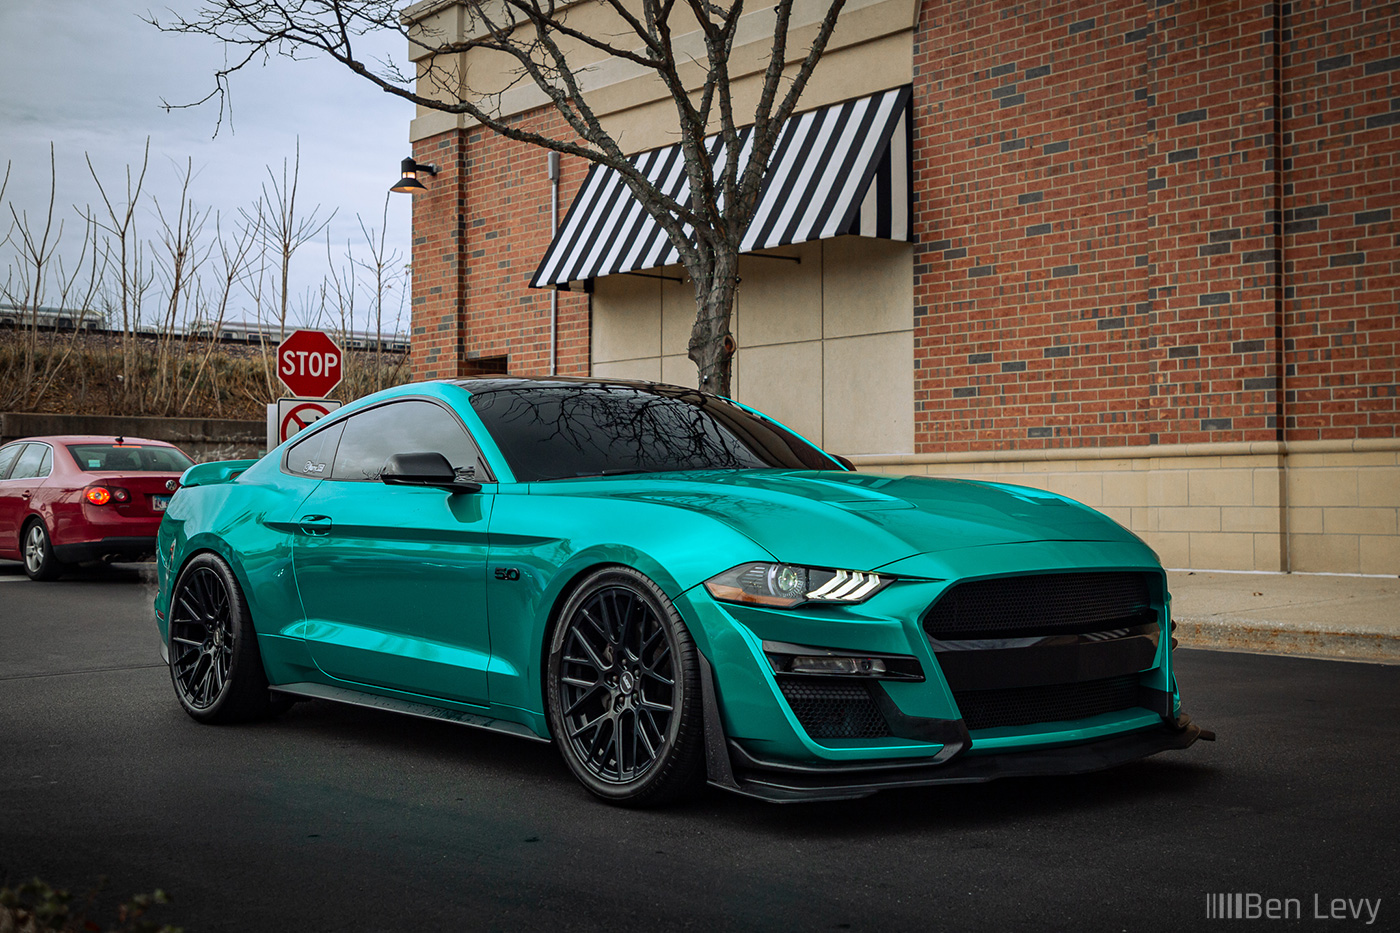 Teal Wrap on S550 Mustang GT